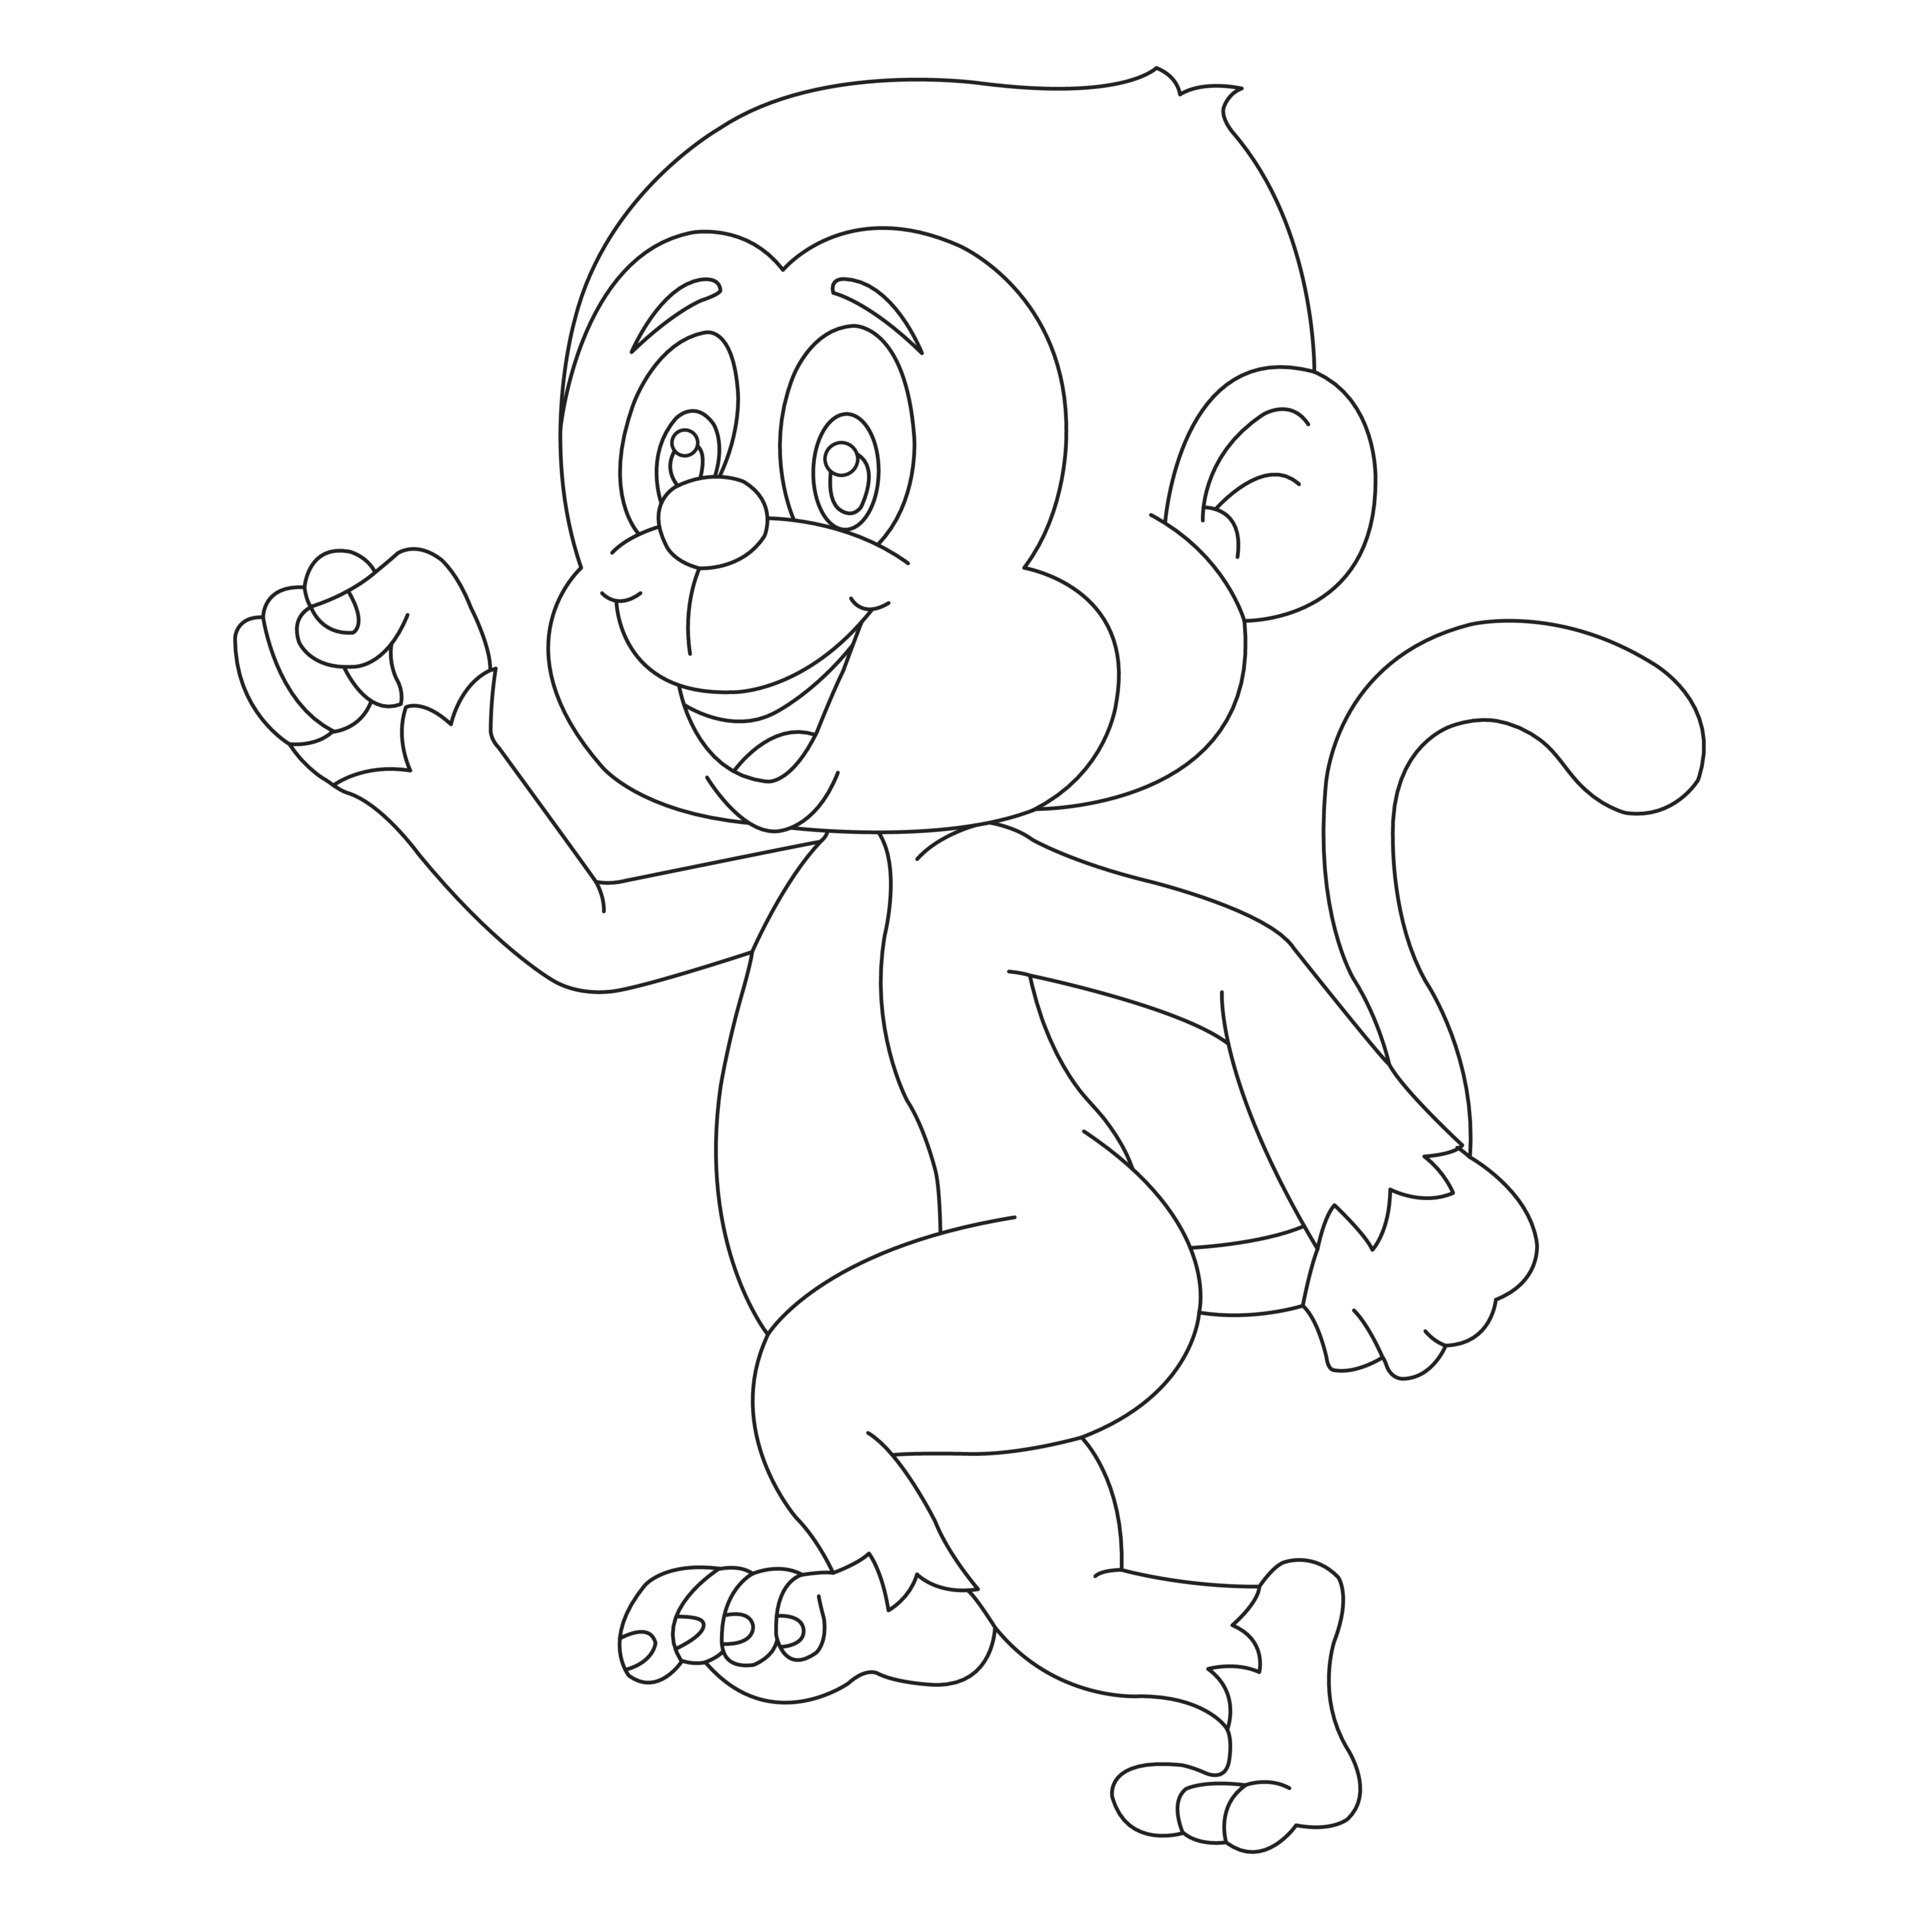 Printable Baby Cartoon Monkey Coloring Page for Kids – SupplyMe